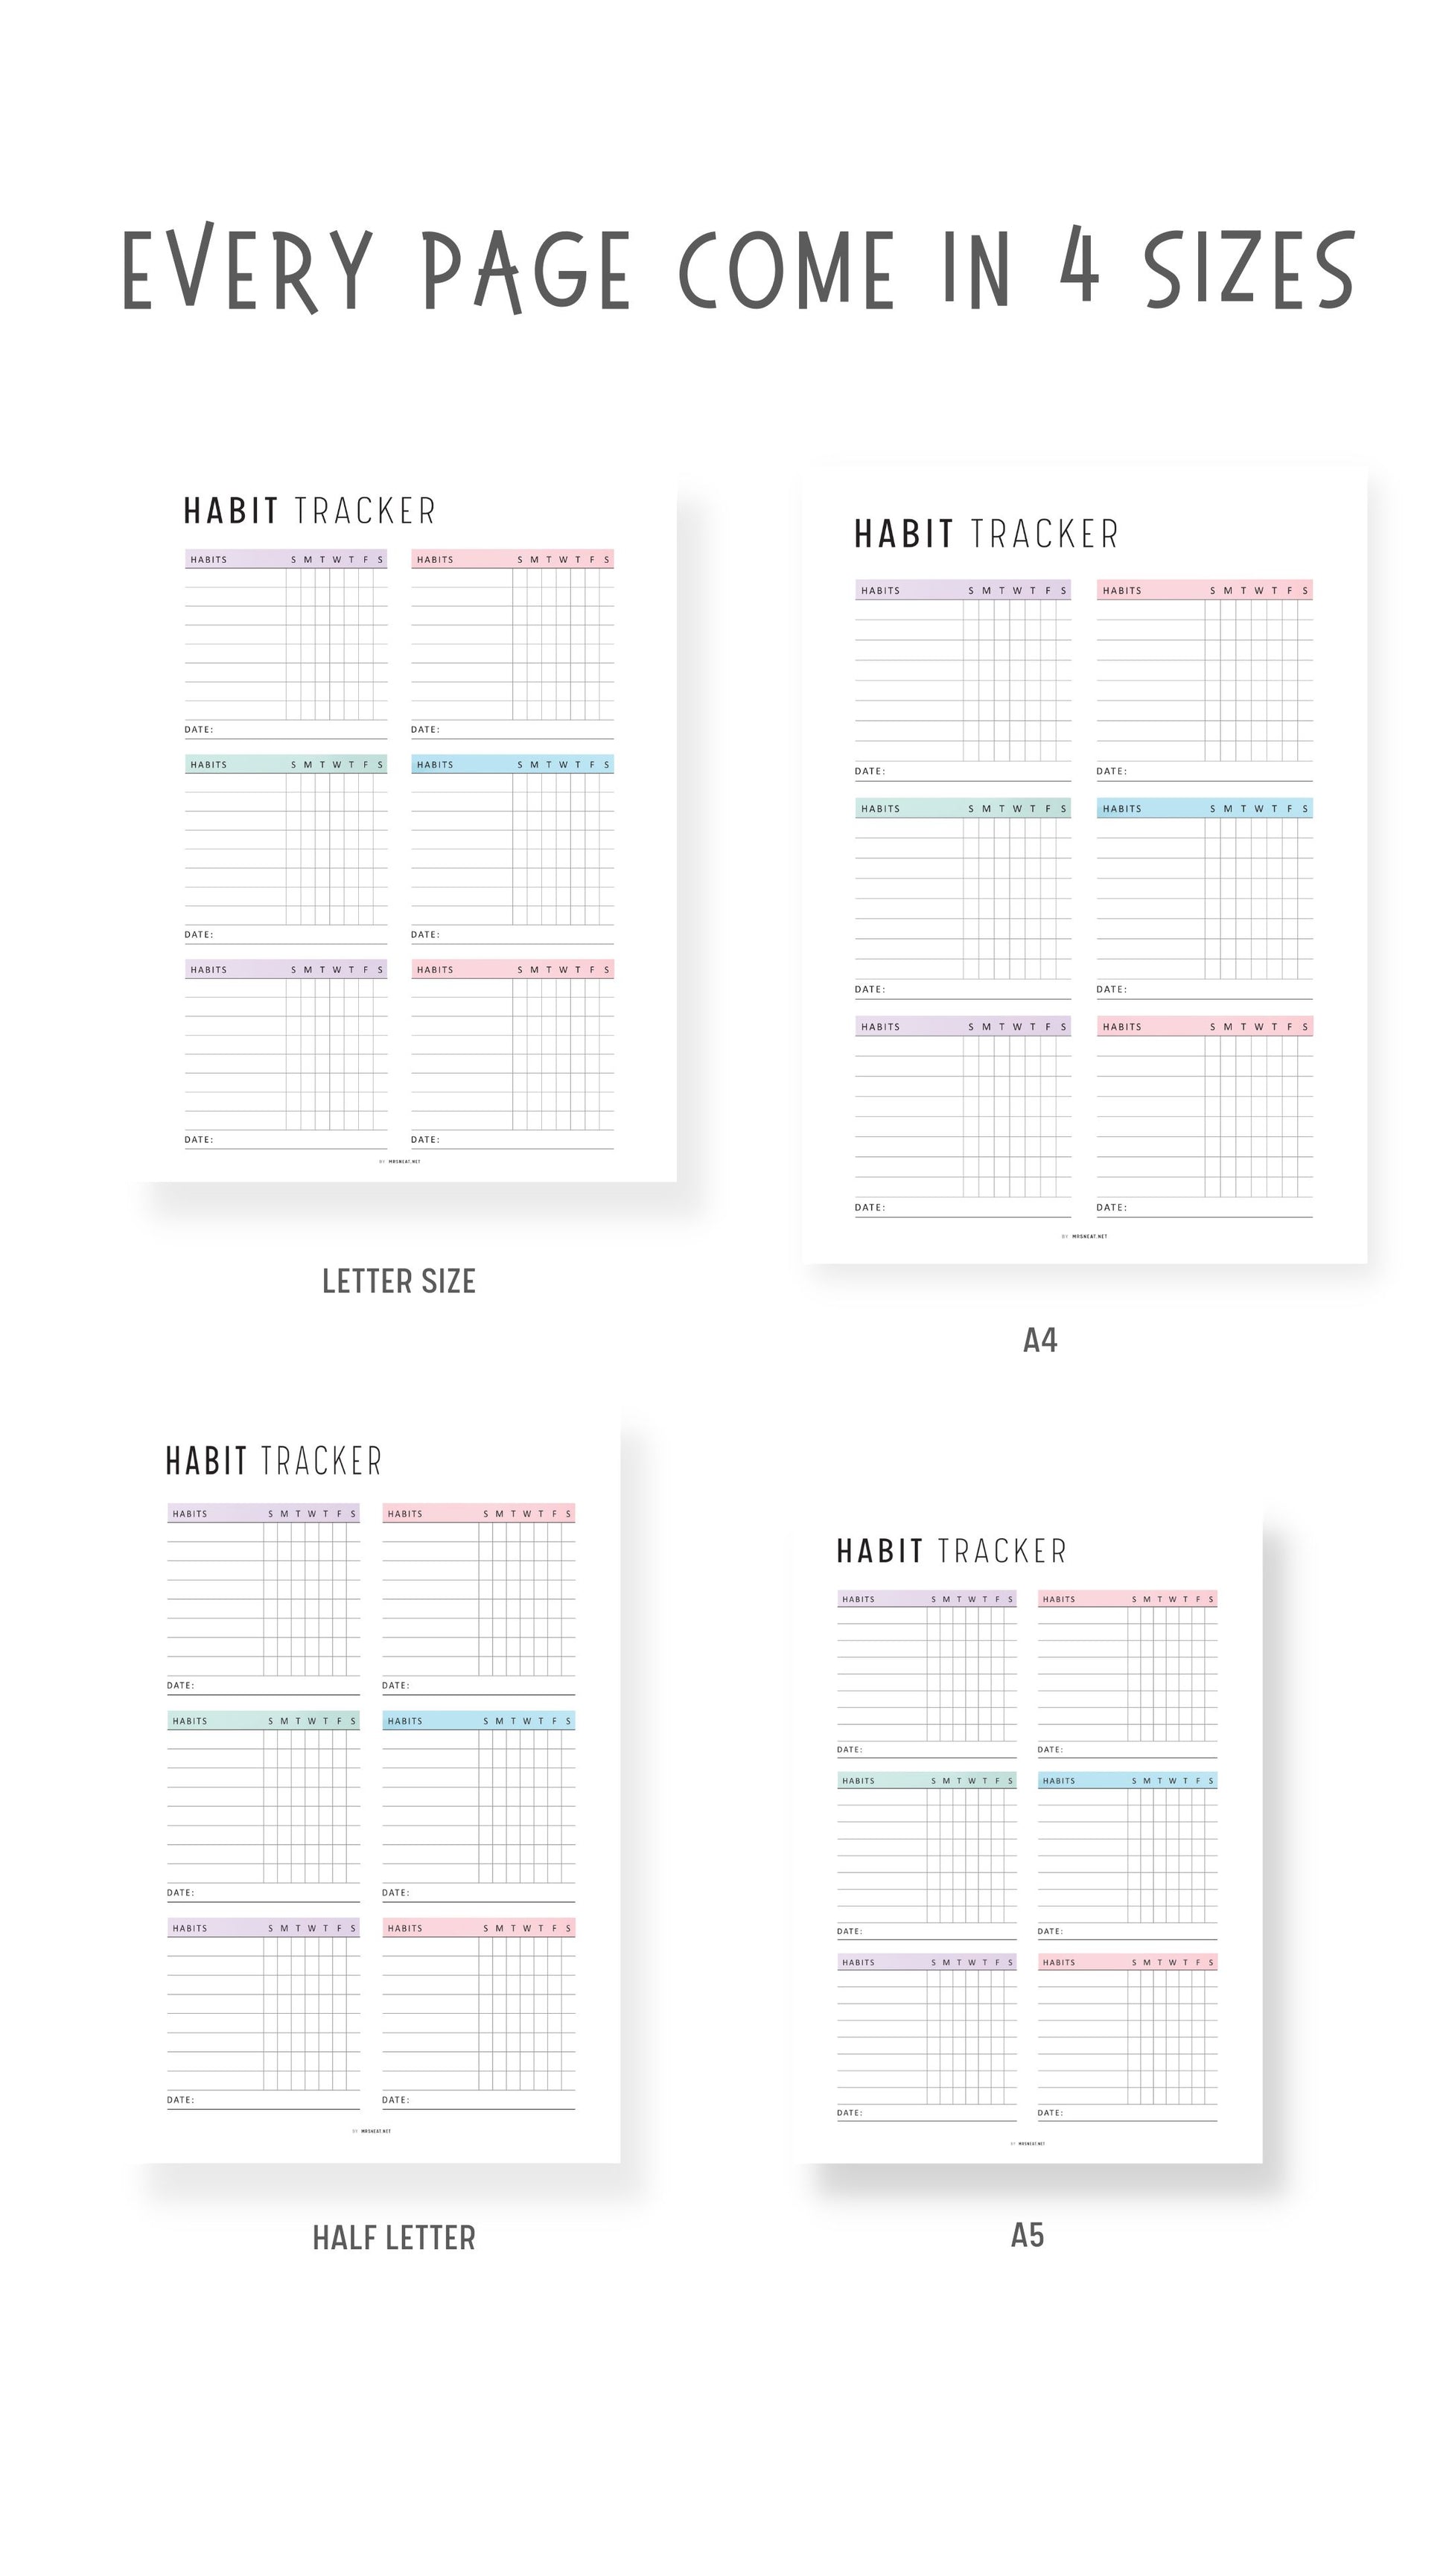 Weekly Habit Tracker Template Printable, 2 versions, 2 color options, Sunday Start, A4, A5, Letter, Half Letter, Digital Habit Tracker, Colorful and Minimalist Style, PDF